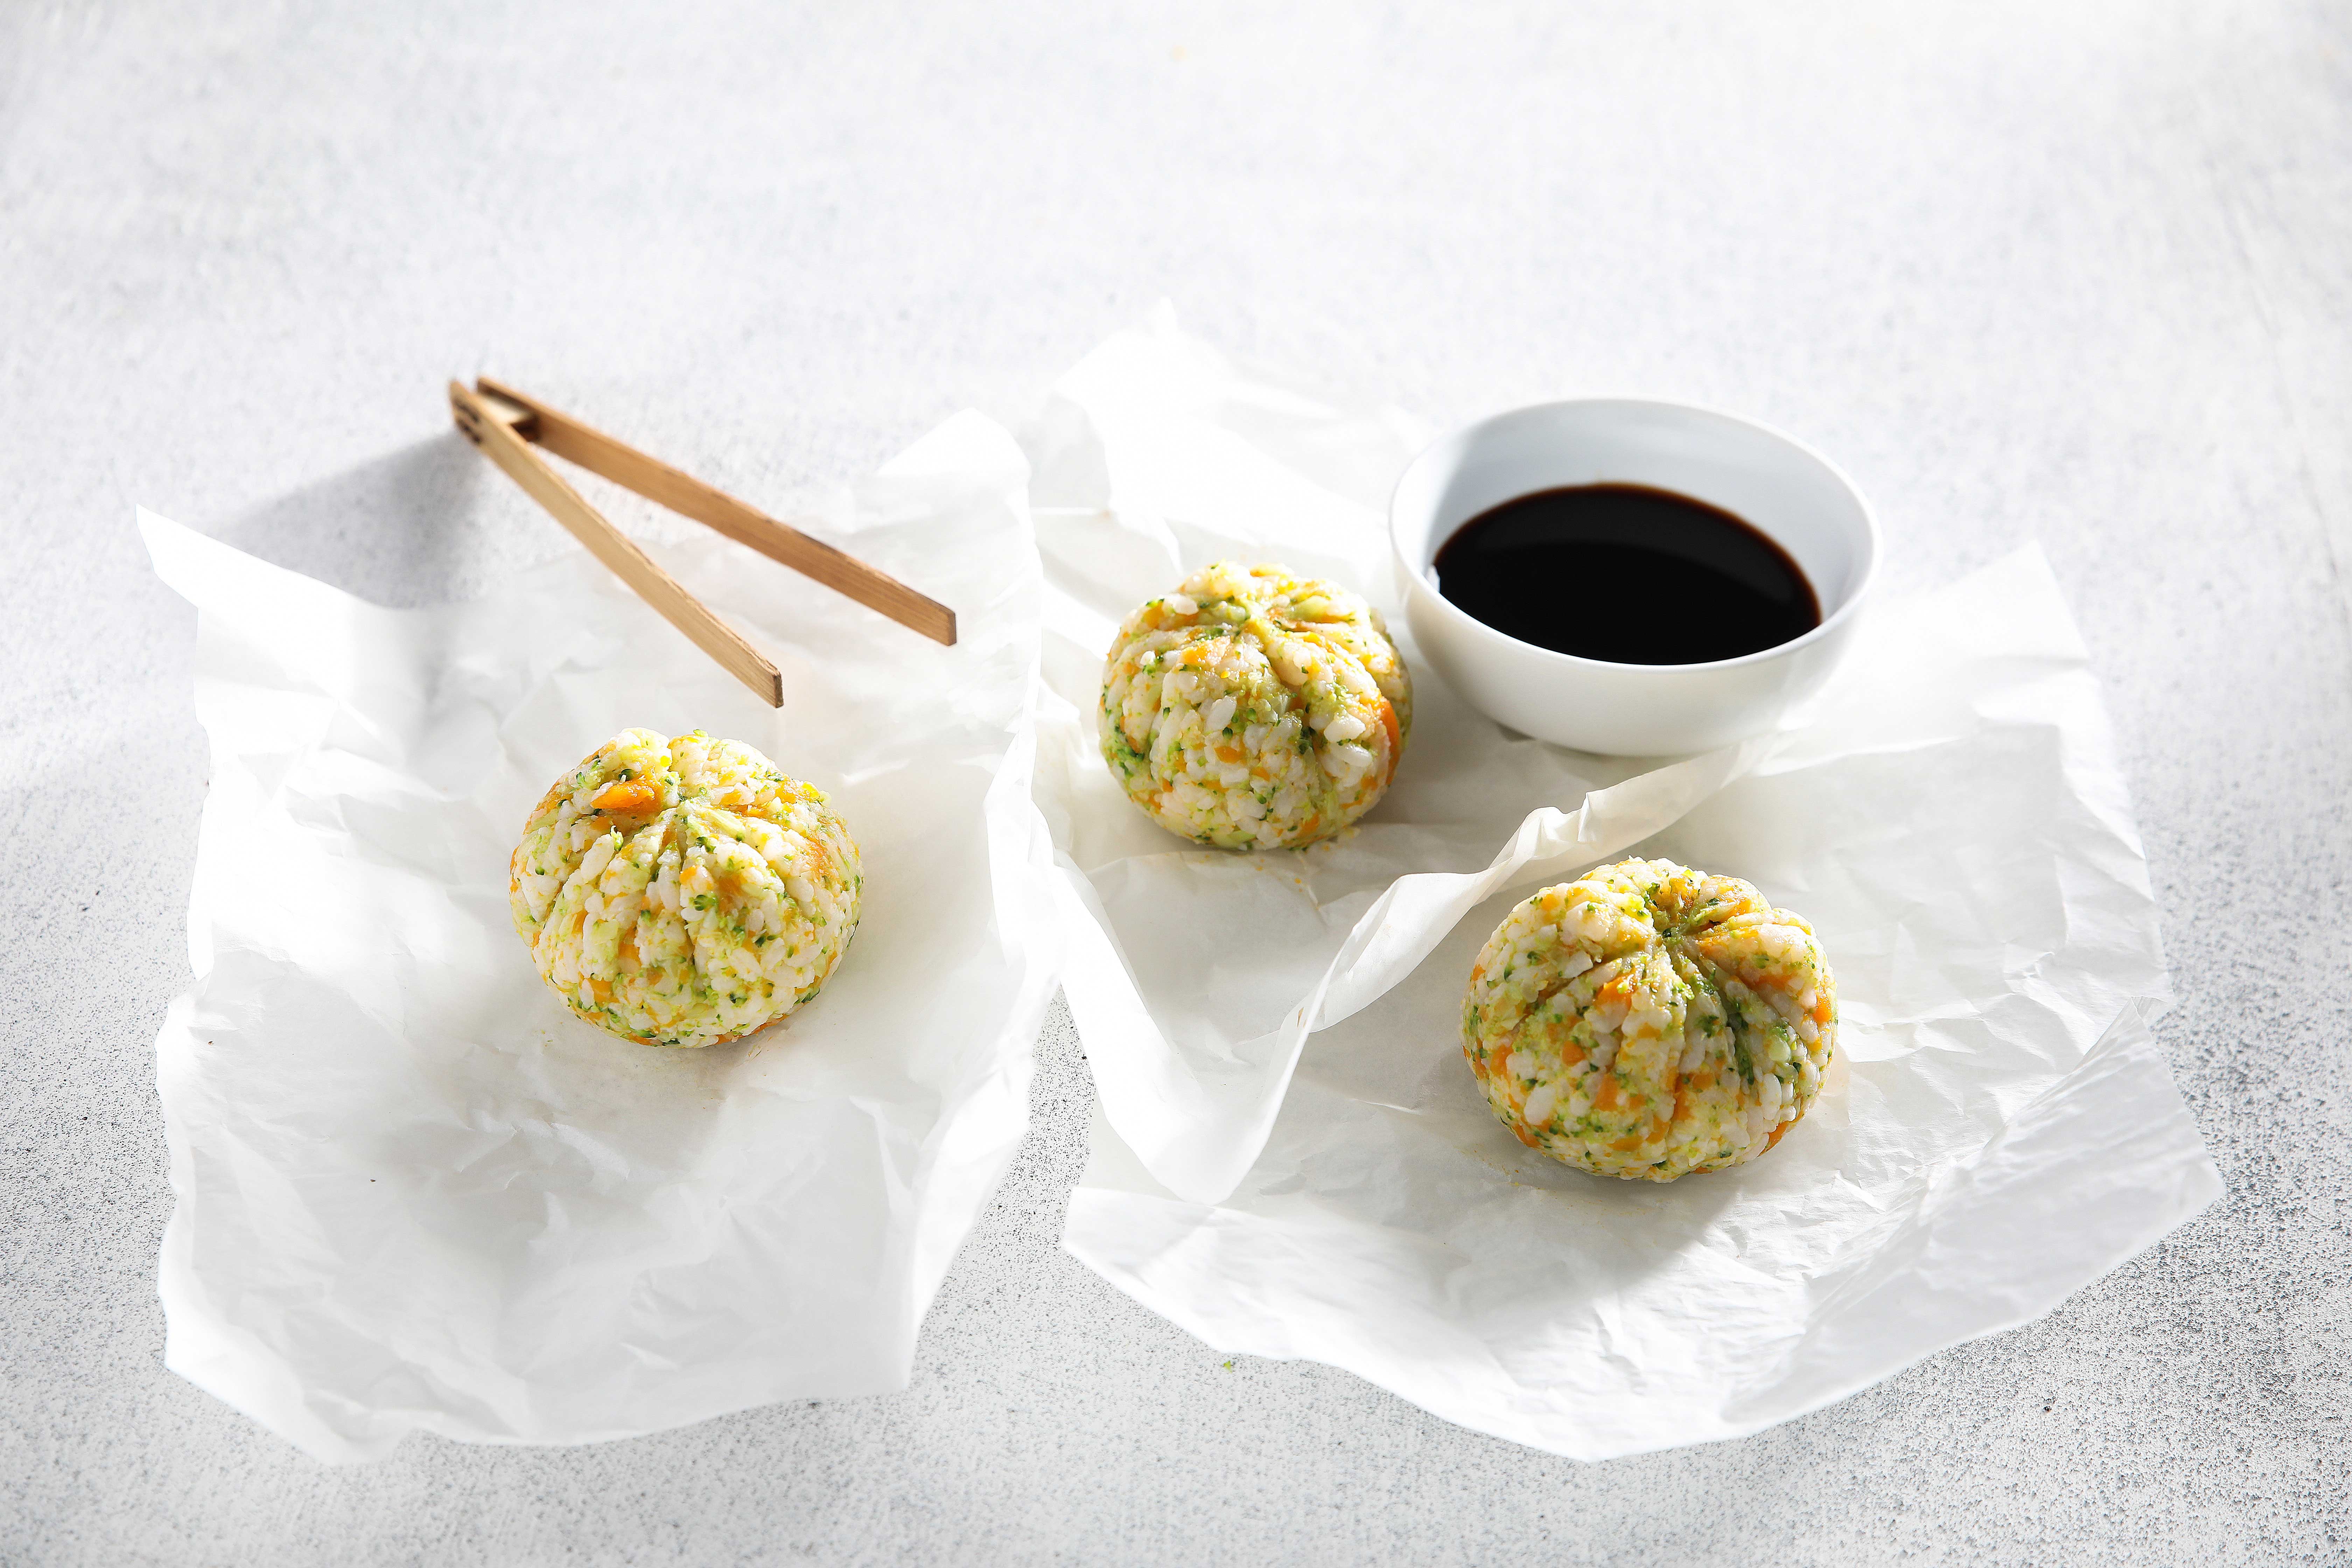 Image shot from above of three japanese rice balls okonomiyaki on baking paper with chopsticks and s small bowl of dipping sauce.